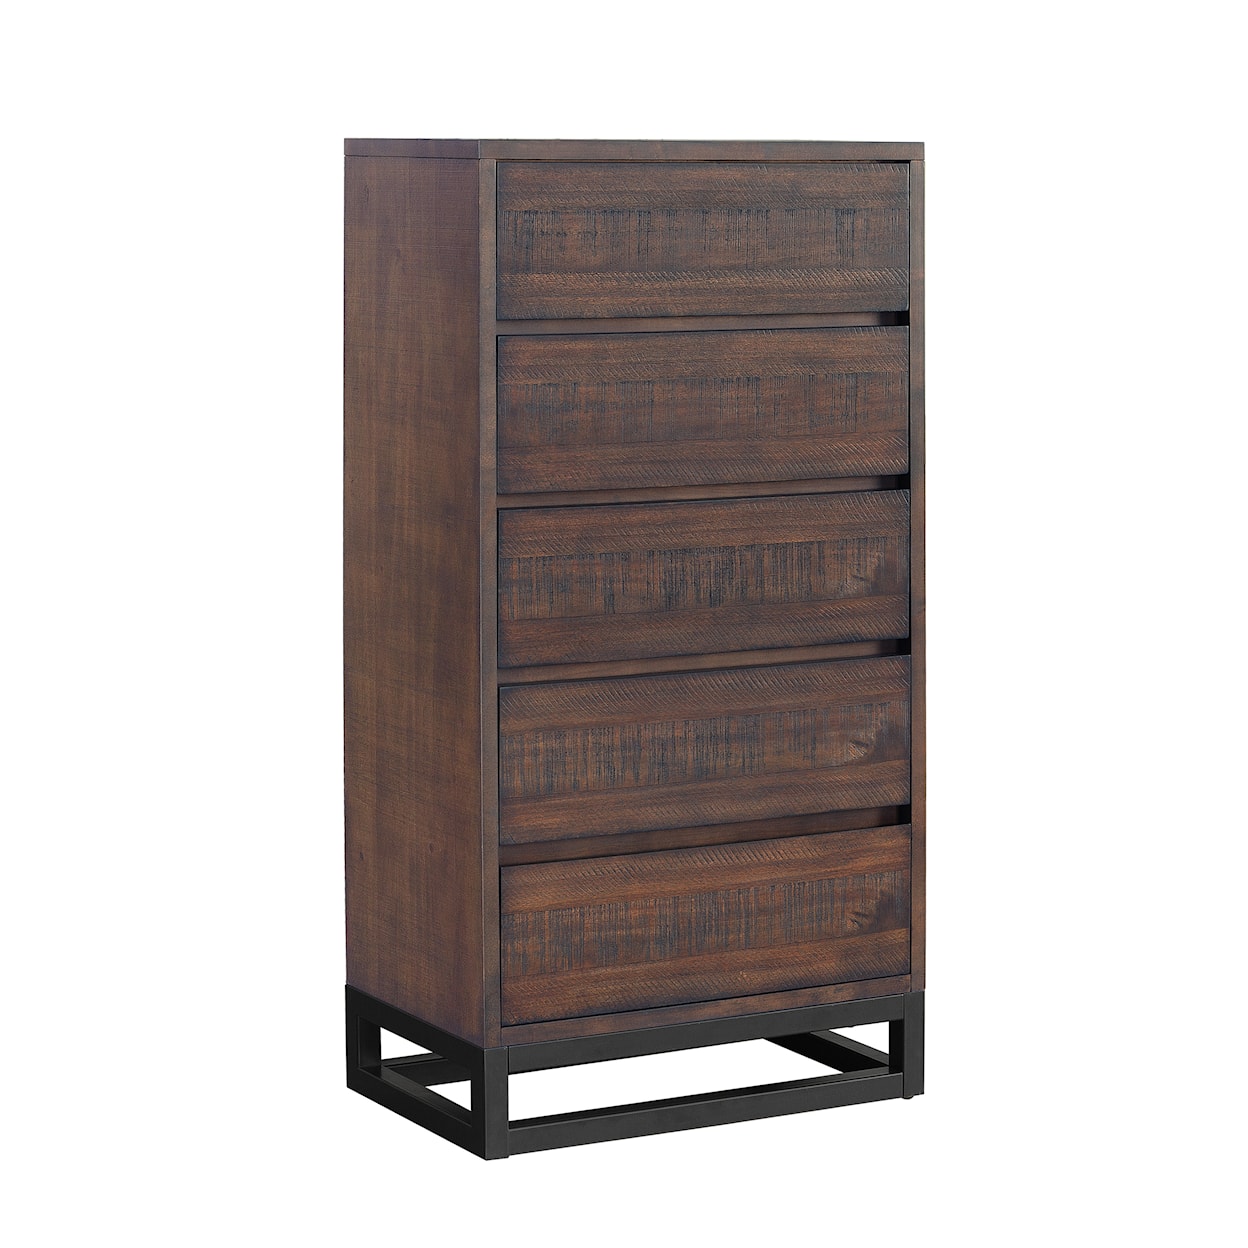 Accentrics Home Accents Modern Industrial Chest